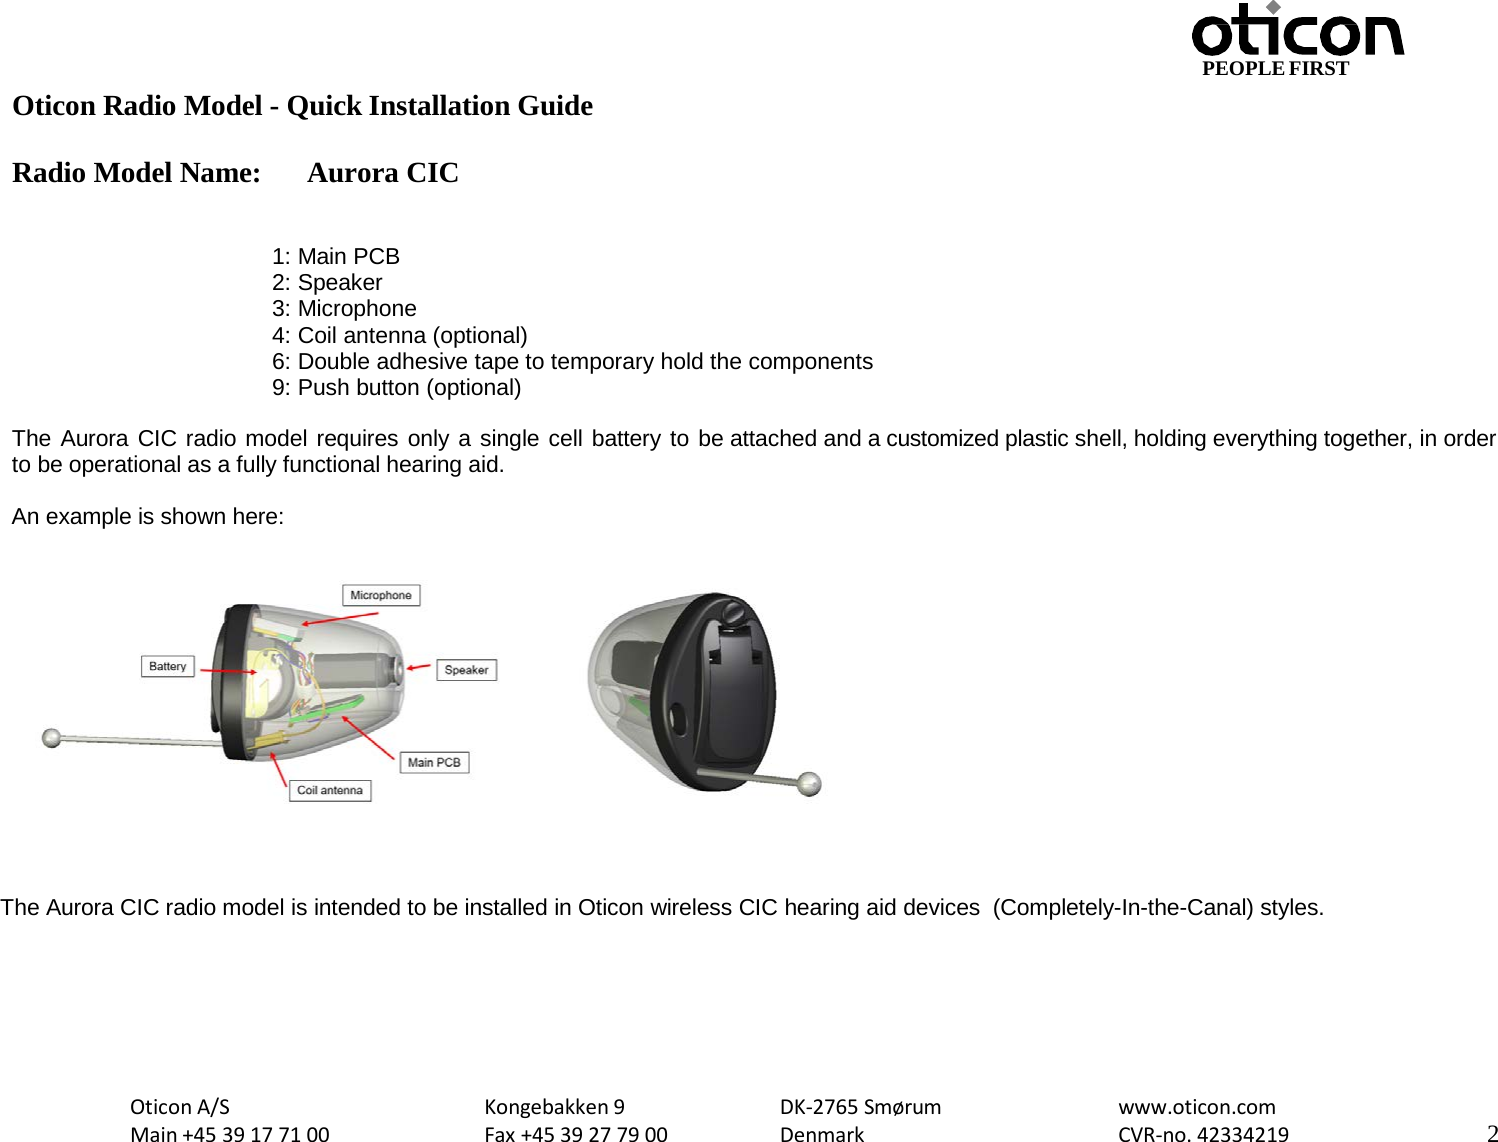 PEOPLE FIRST Oticon Radio Model - Quick Installation Guide Radio Model Name: Aurora CIC Oticon A/S Main +45 39 17 71 00 Kongebakken 9 Fax +45 39 27 79 00 DK-2765 Smørum Denmark www.oticon.com CVR-no. 42334219 2     1: Main PCB 2: Speaker 3: Microphone 4: Coil antenna (optional) 6: Double adhesive tape to temporary hold the components 9: Push button (optional)  The Aurora CIC radio model requires only a single cell battery to be attached and a customized plastic shell, holding everything together, in order to be operational as a fully functional hearing aid.  An example is shown here:       The Aurora CIC radio model is intended to be installed in Oticon wireless CIC hearing aid devices  (Completely-In-the-Canal) styles. 